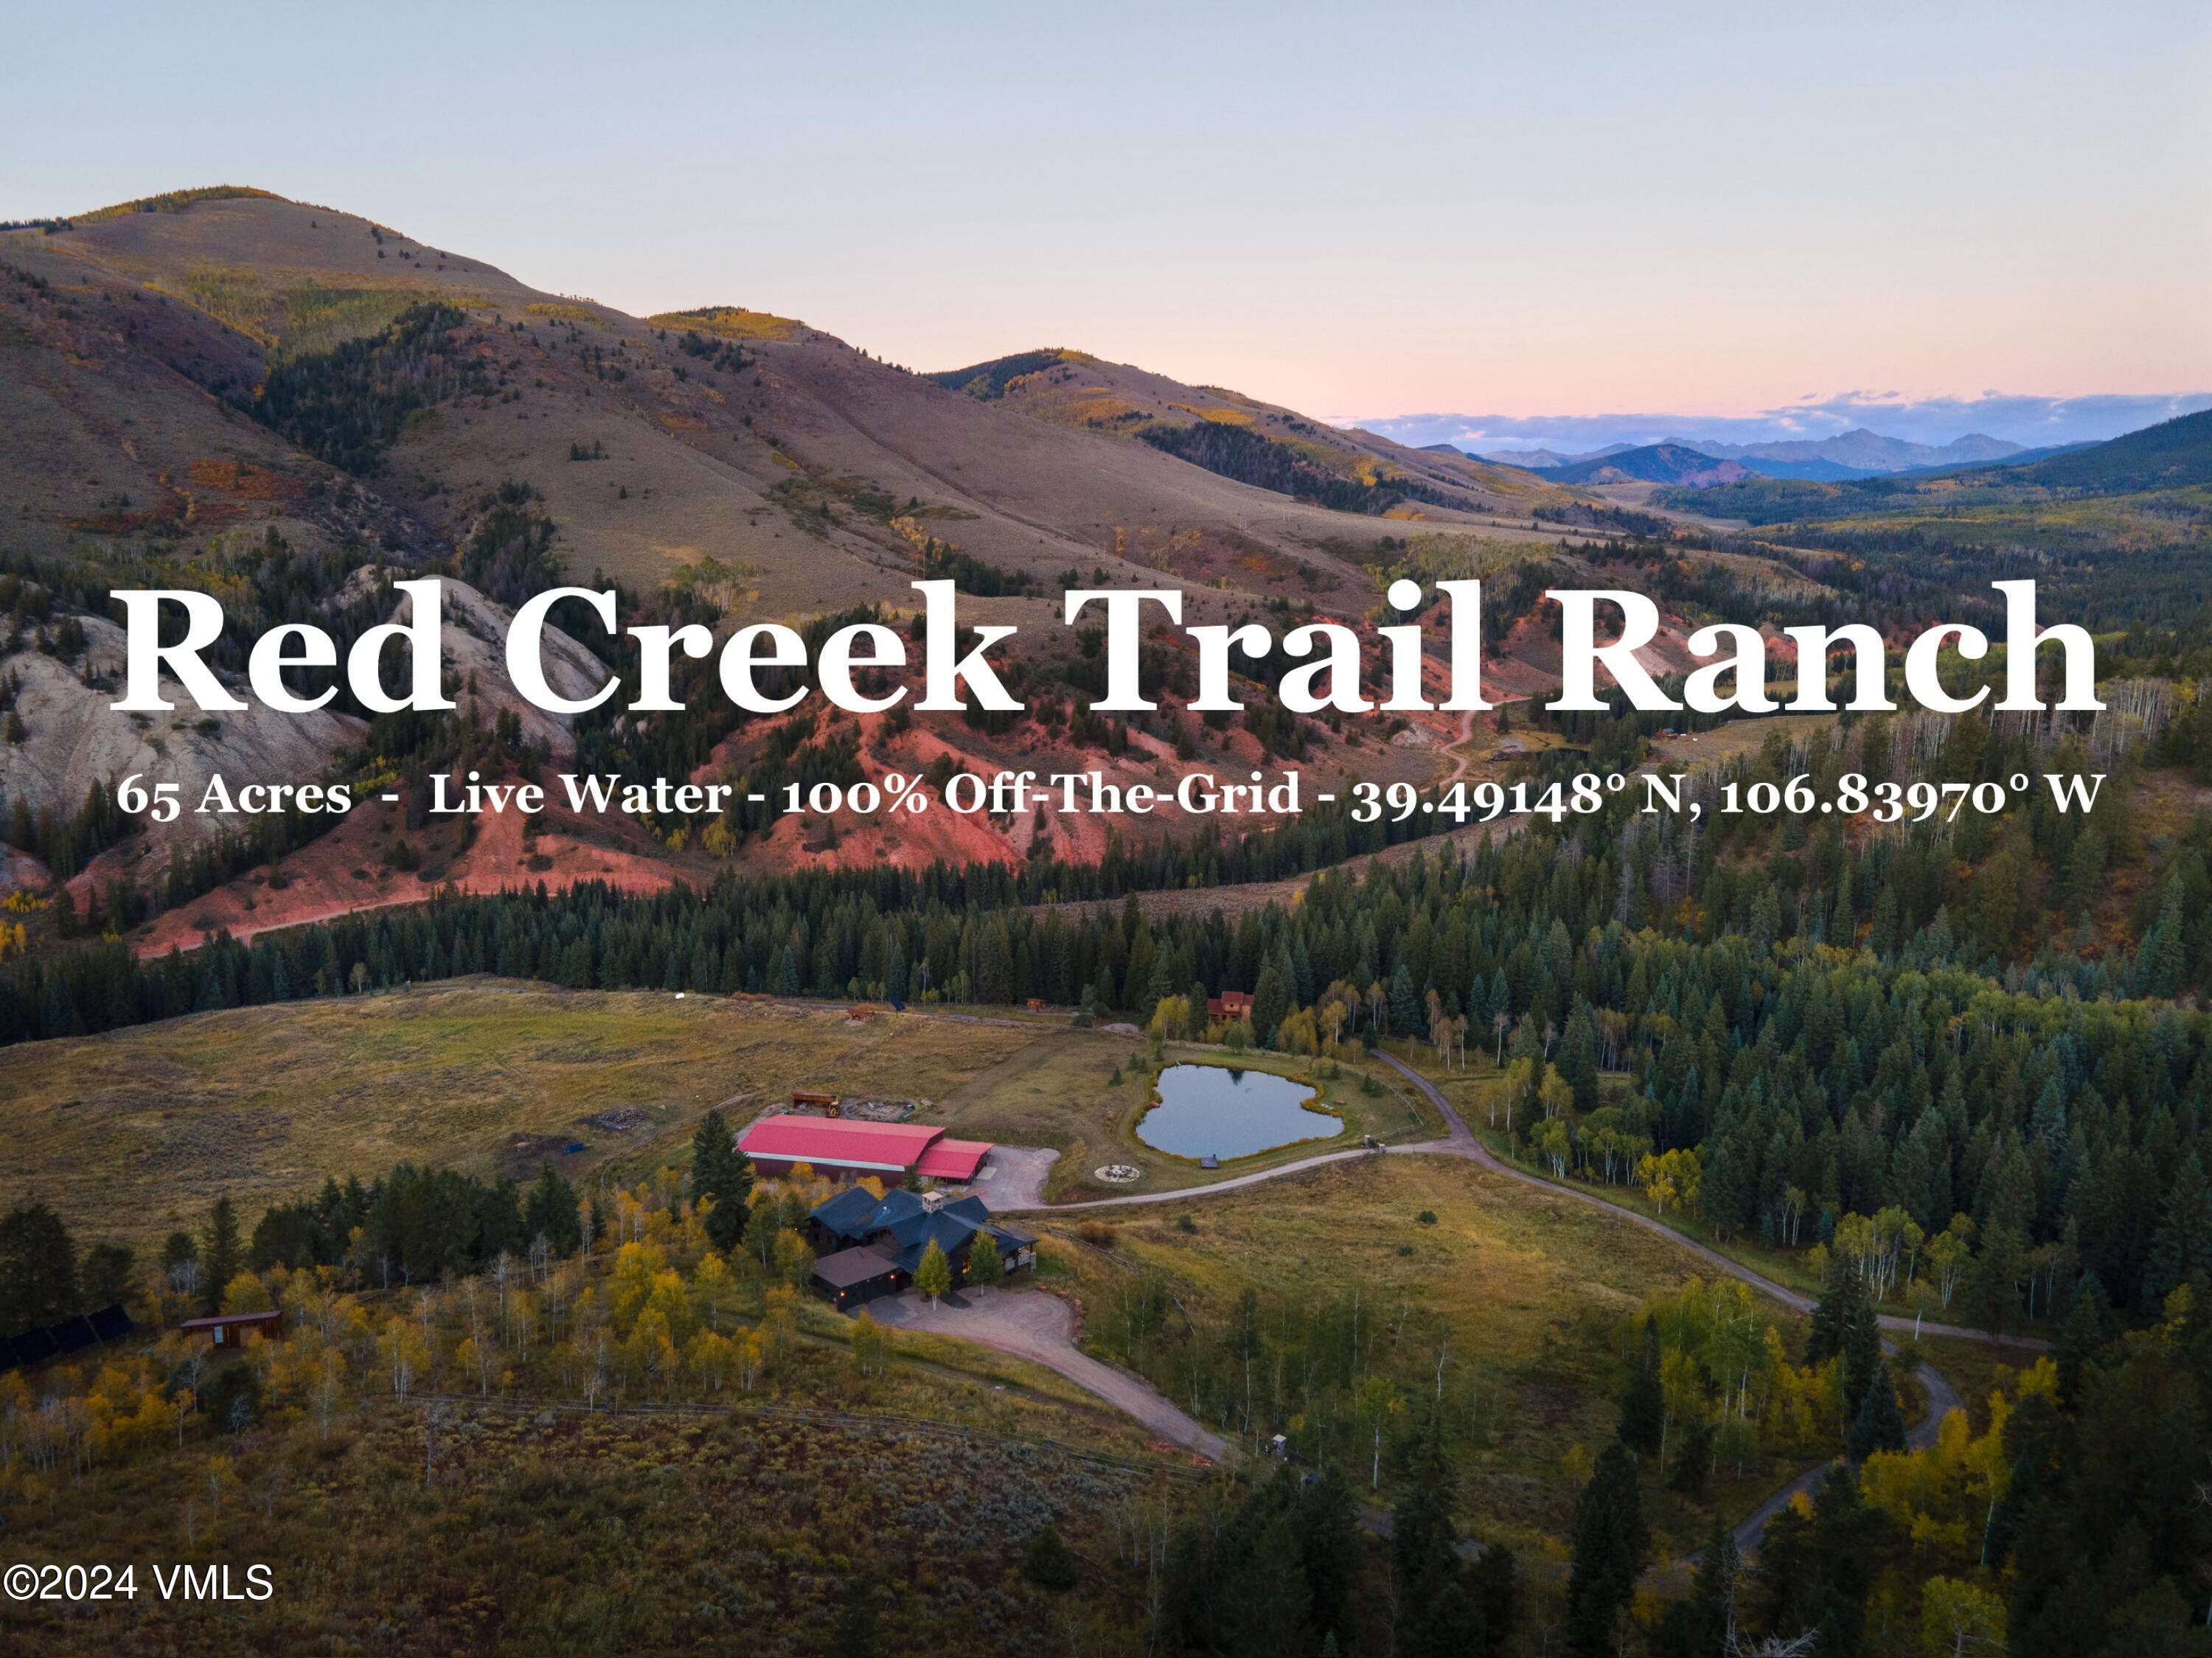 Welcome to Red Creek Trail Ranch This 65 acre 'live water' property is a fusion of luxury, tranquility, and self sustainability.